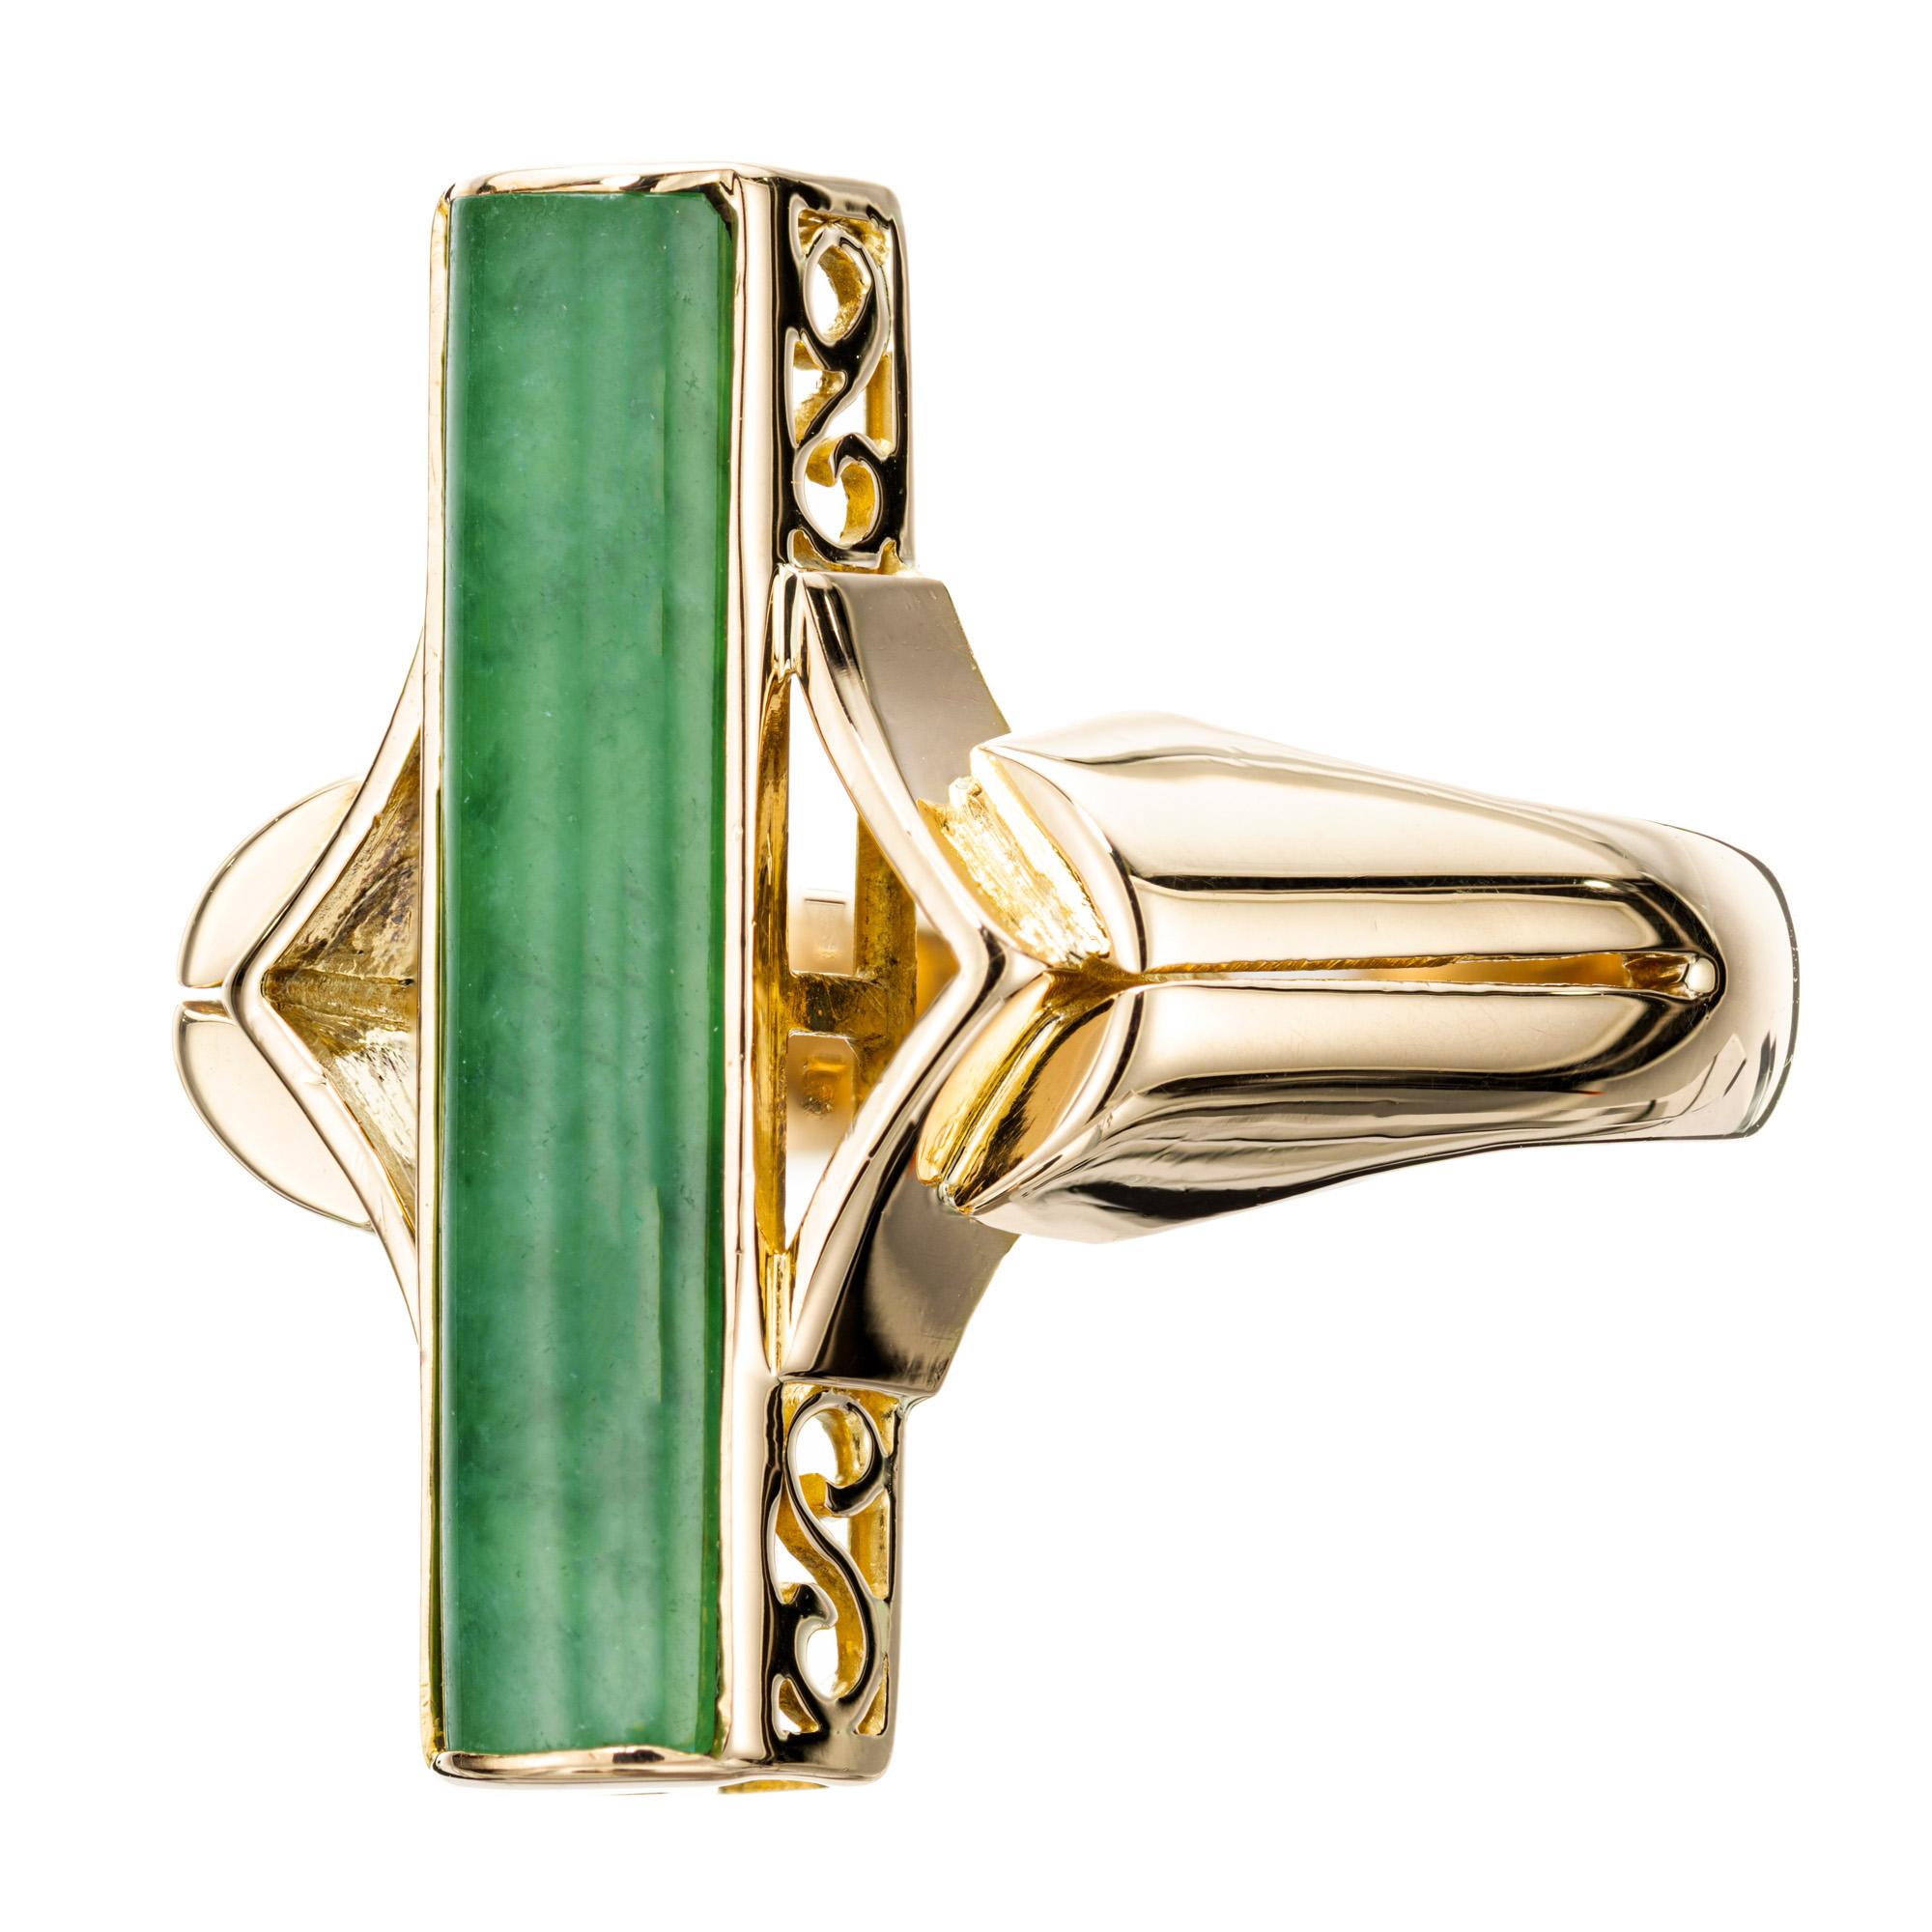 1940's Jadeite jade cylinder ring. GIA certified, 1.30ct natural untreated jadeite jade in a handmade 14k yellow gold setting. 

1 rectangular green jadeite jade, approx.. 1.30cts GIA Certificate# 6227393271
Size 7 and sizable 
14k yellow gold